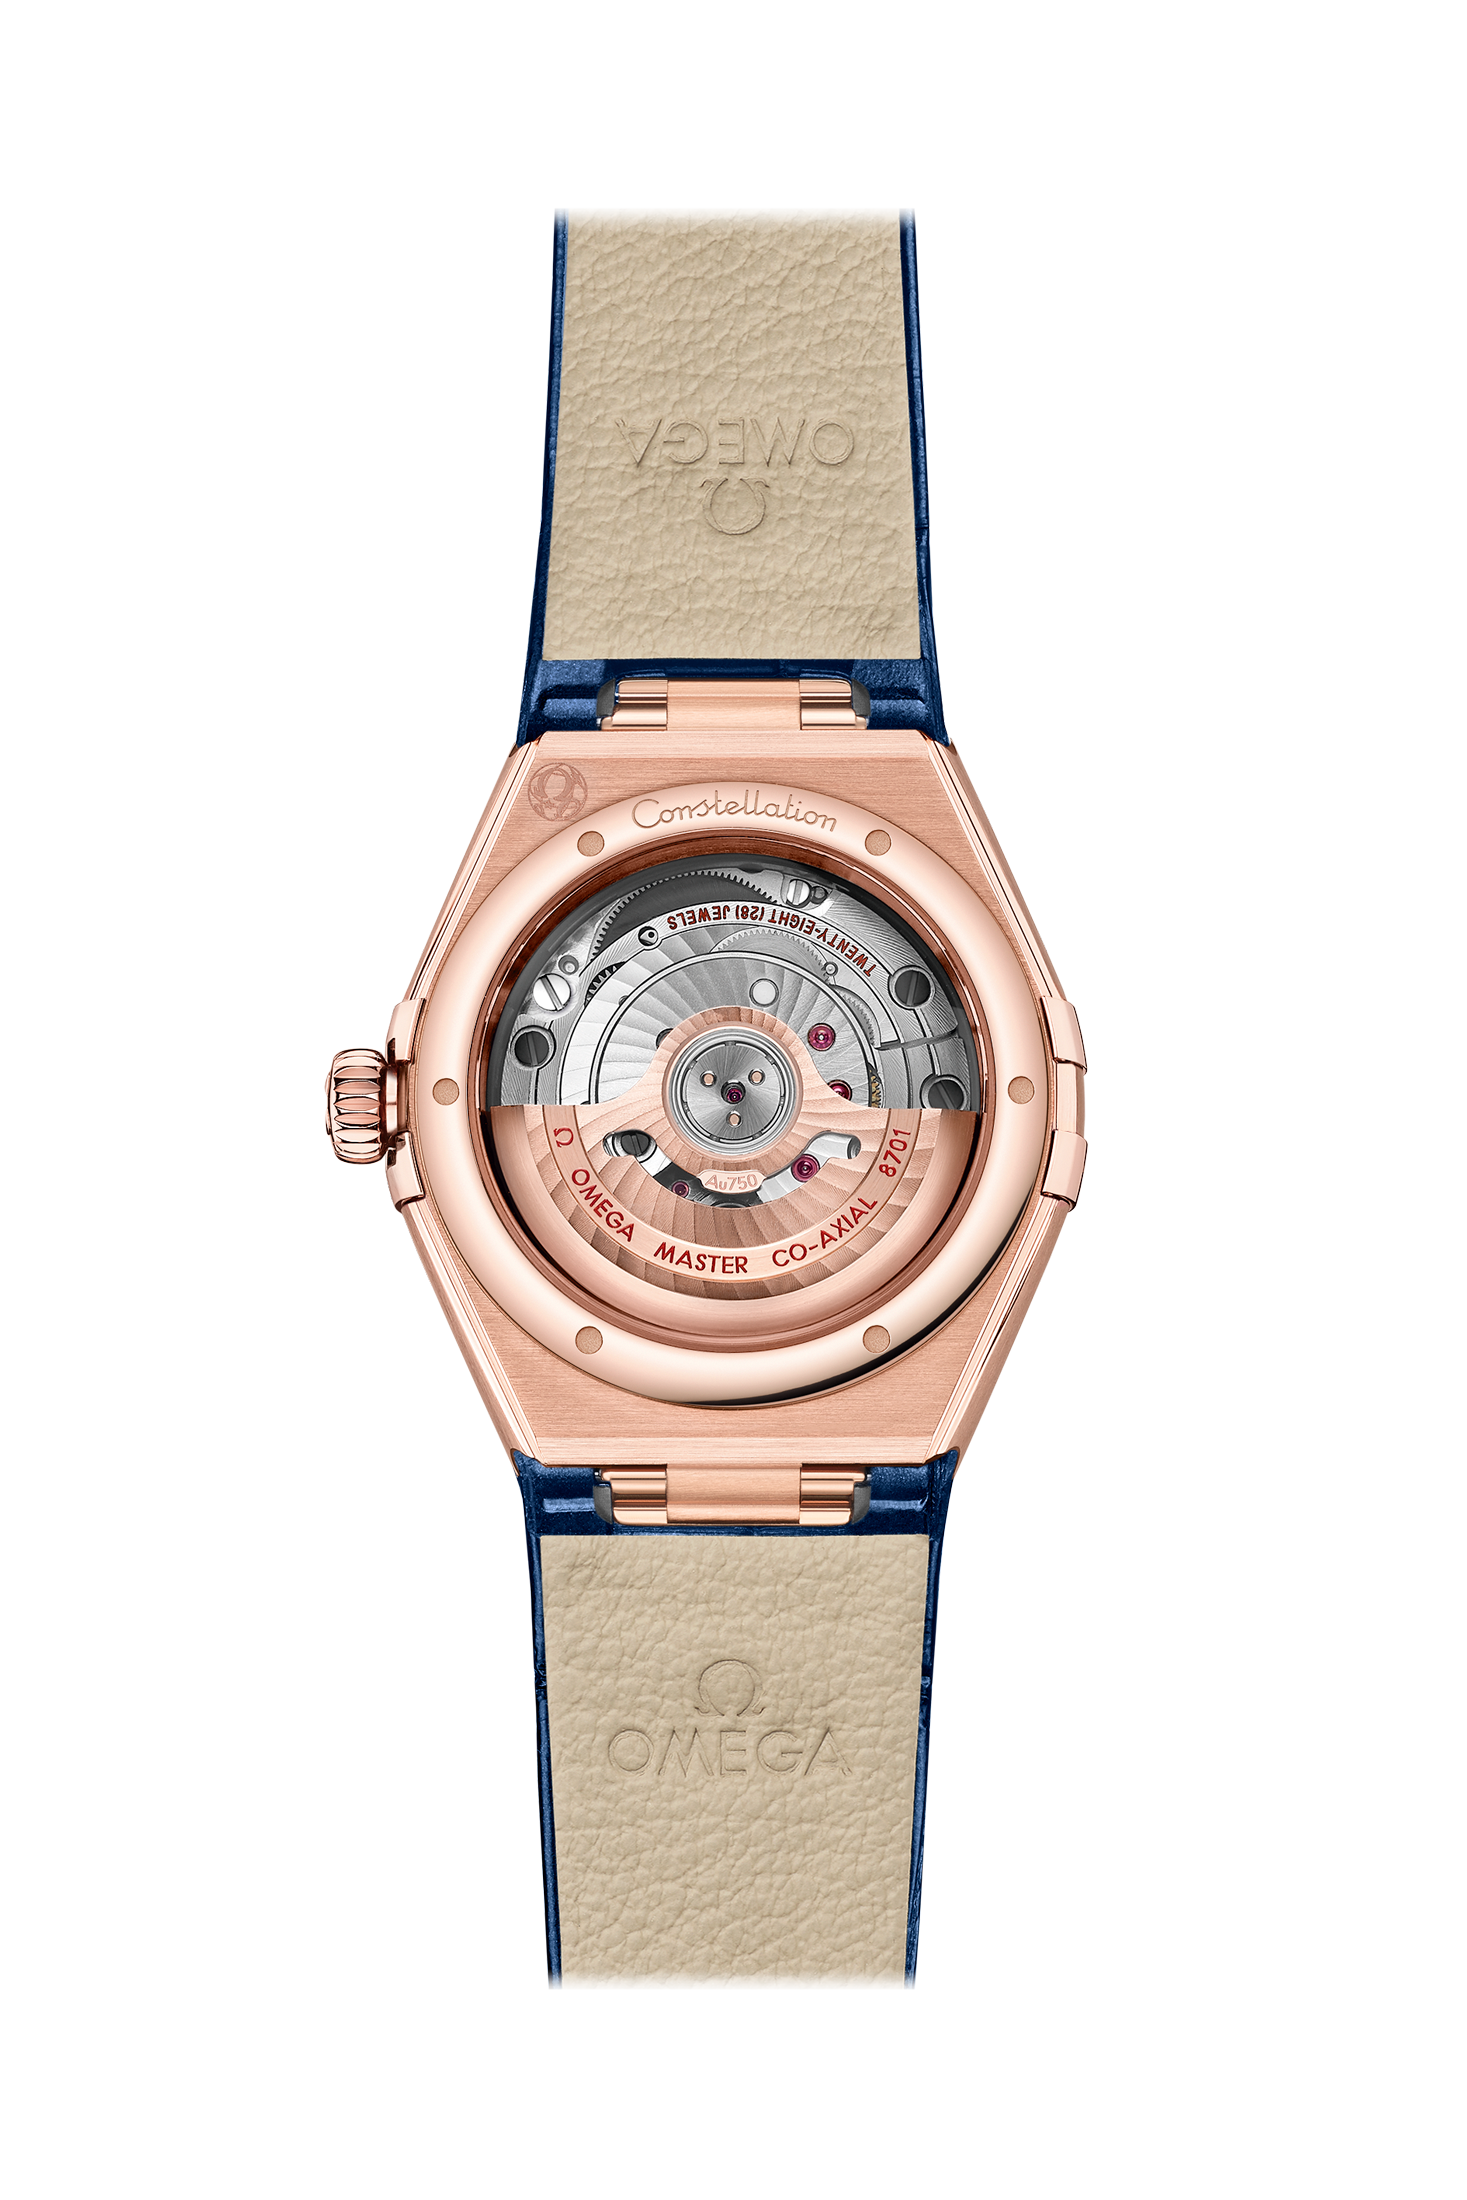 Ladies' watch  OMEGA, Constellation Co Axial Master Chronometer / 29mm, SKU: 131.53.29.20.53.002 | watchapproach.com